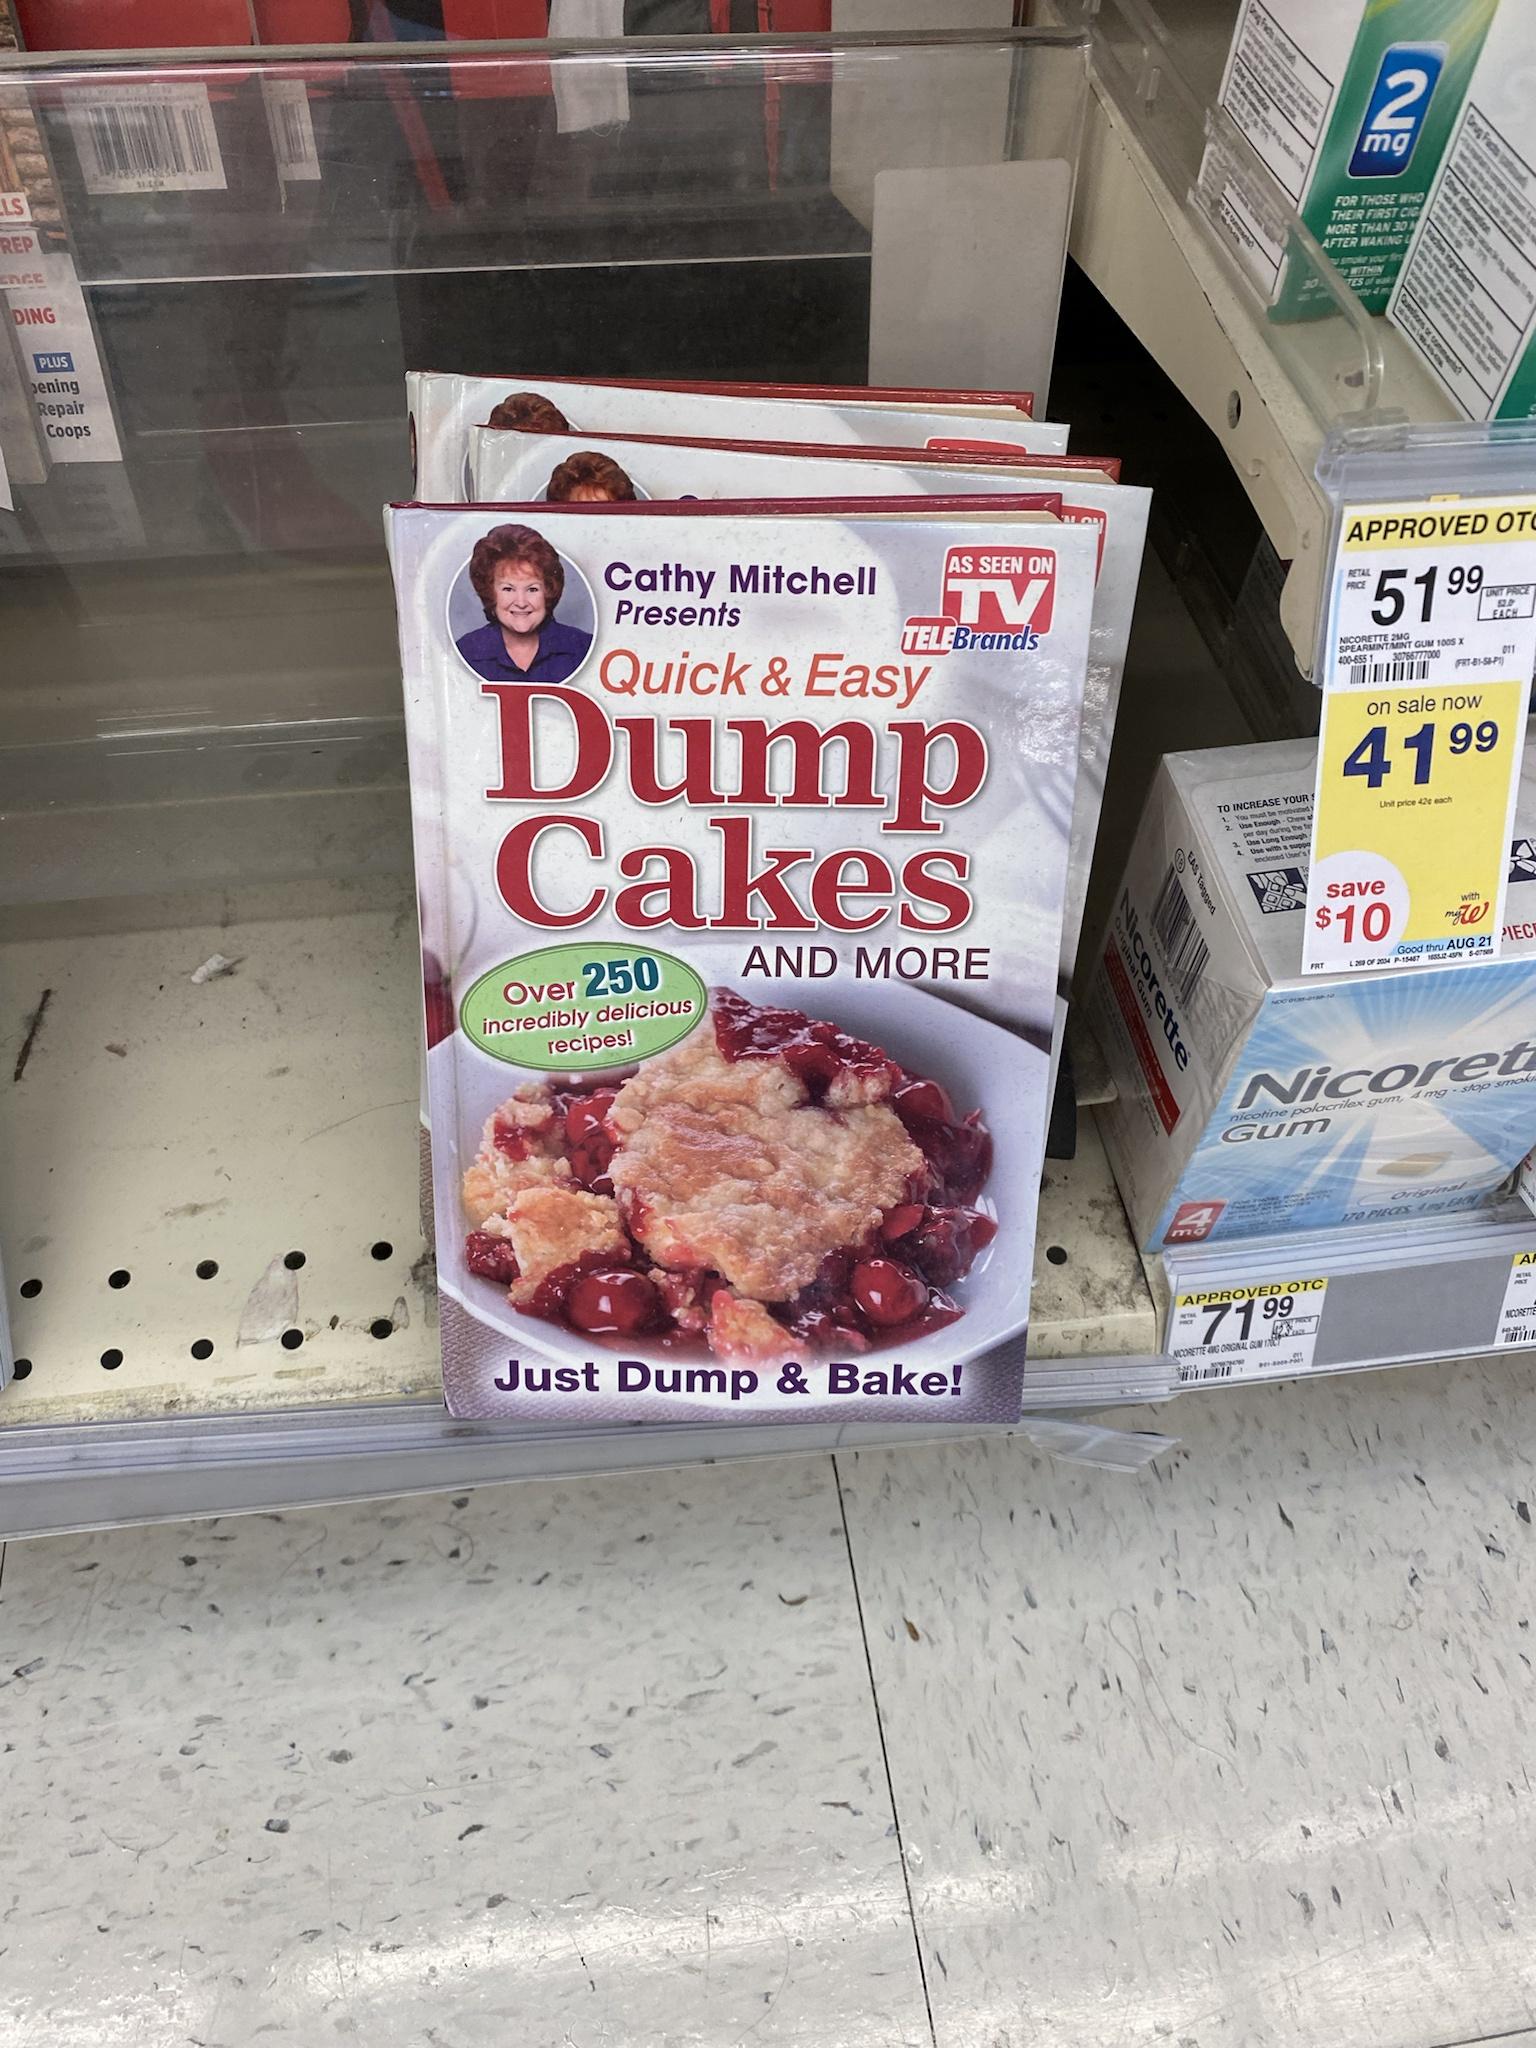 meat - 2 Approvedote Anno Cathy Mitchell Presents Teleton Quick & Easy Tv 519 Dump Cakes 4199 $10 And More Over 250 Nicoret Ch 7189 Just Dump & Bake!